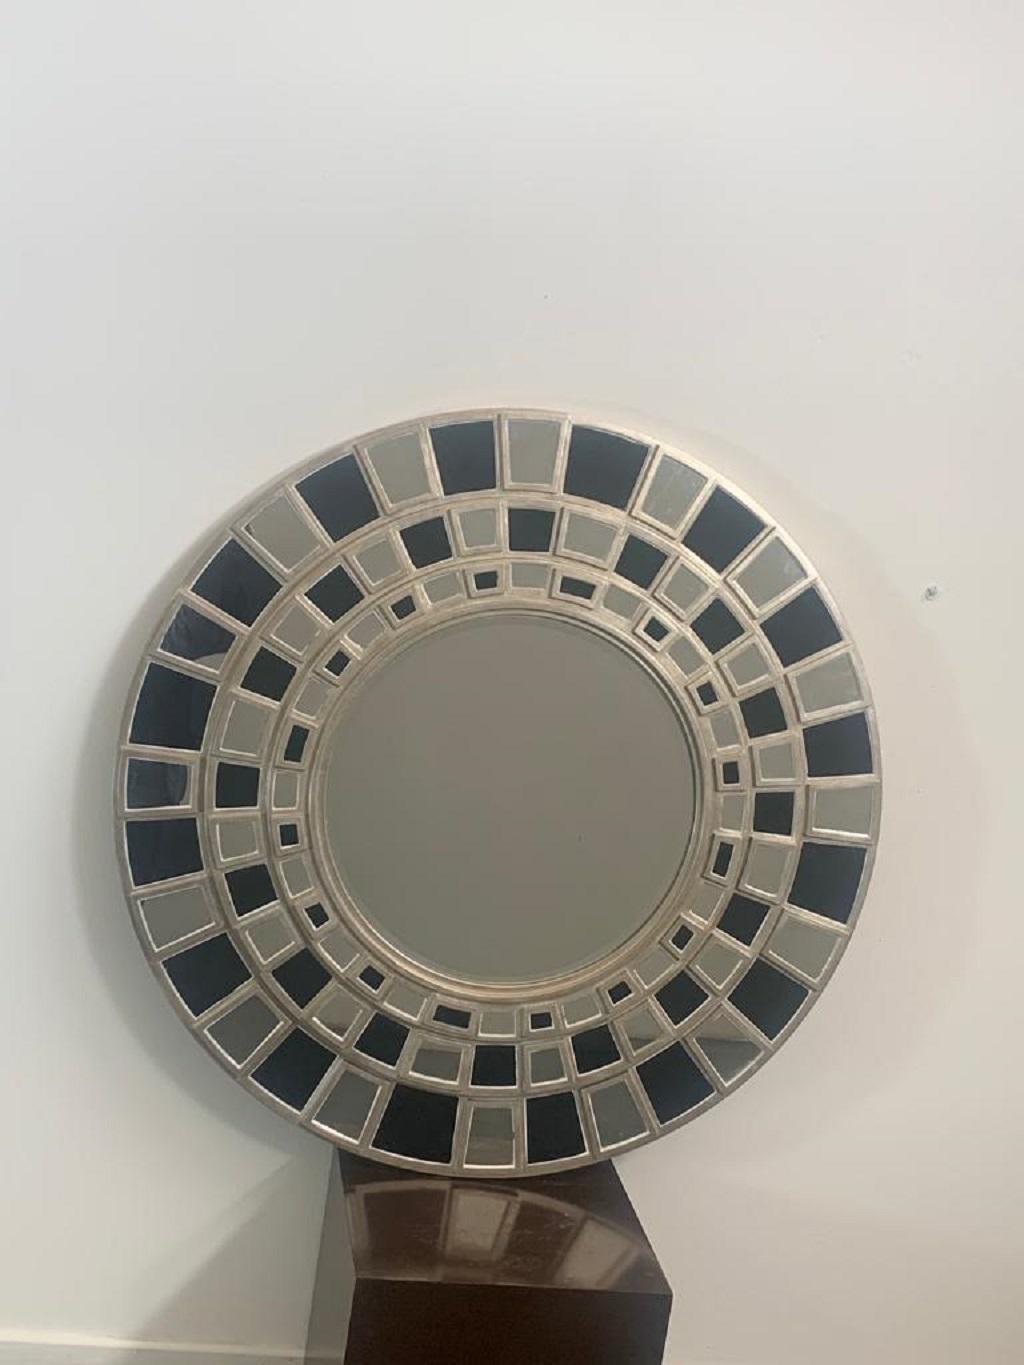 Round wall mirror by Lam Lee Group, 1990s. The frame is on three levels with overlapping black glass and mirror tiles. The structure is made of silver solid wood.
Packaging with bubble wrap and cardboard boxes is included. If the wooden packaging is